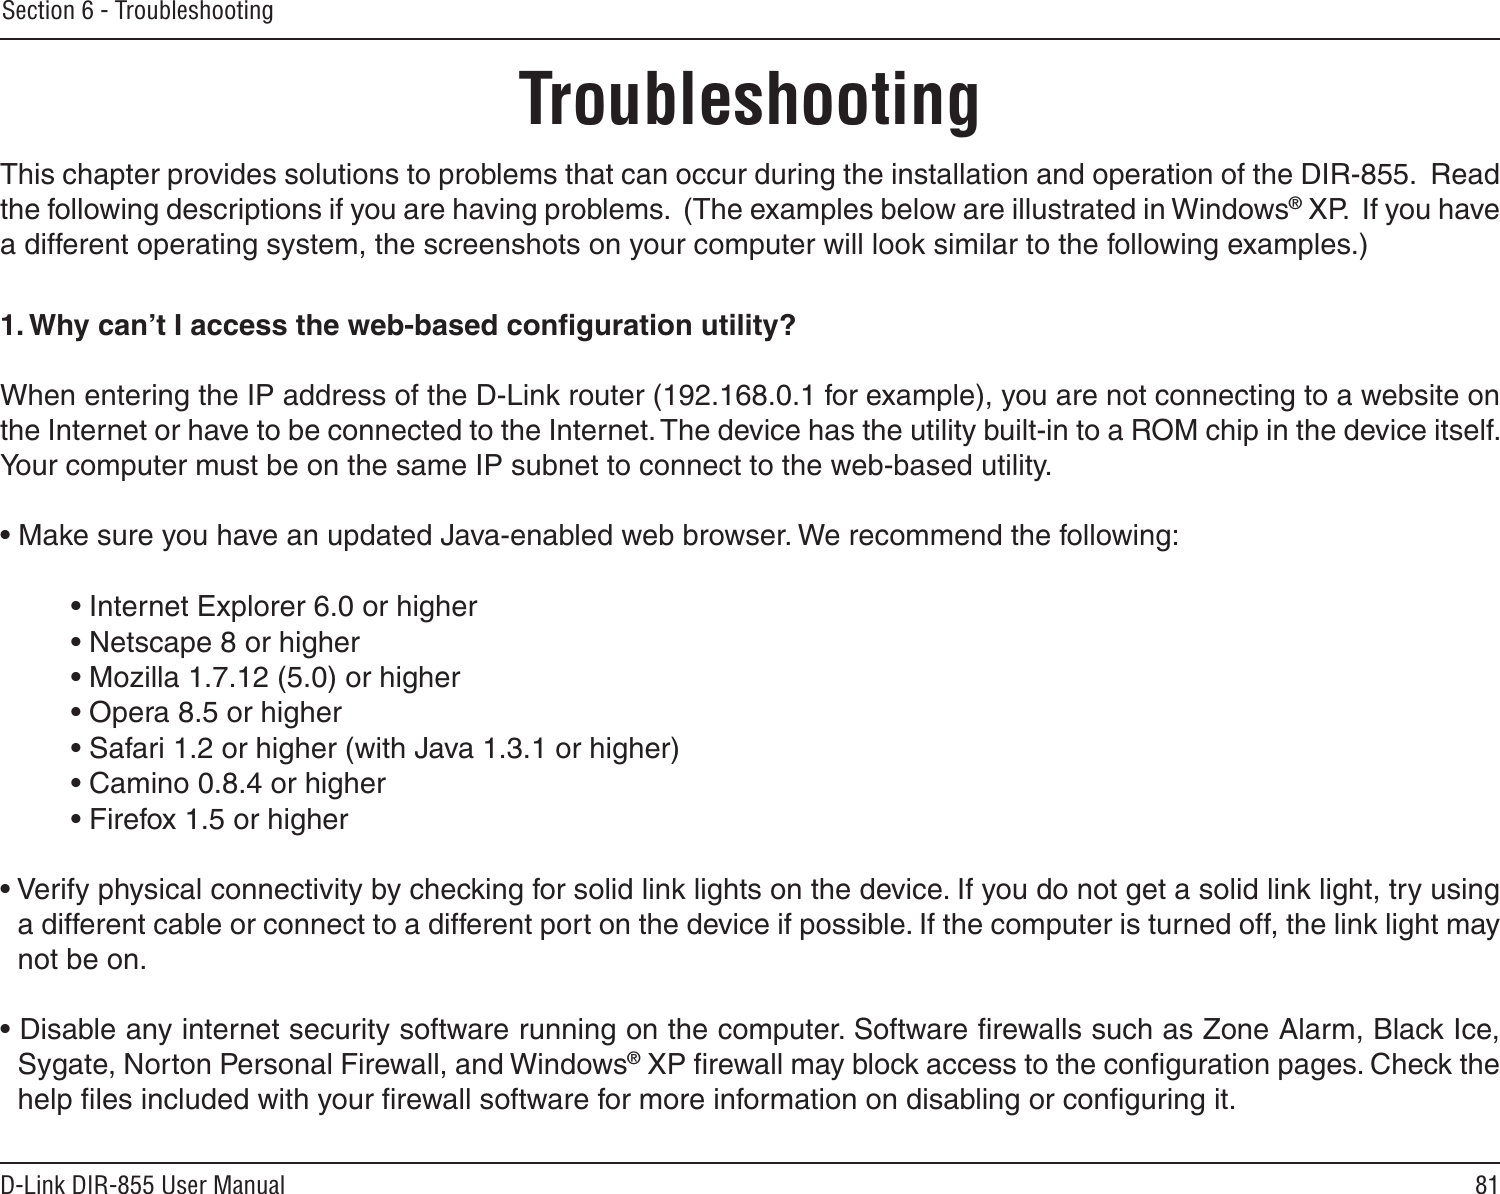 81D-Link DIR-855 User ManualSection 6 - TroubleshootingTroubleshootingThis chapter provides solutions to problems that can occur during the installation and operation of the DIR-855.  Read the following descriptions if you are having problems.  (The examples below are illustrated in Windows® XP.  If you have a different operating system, the screenshots on your computer will look similar to the following examples.)1. Why can’t I access the web-based conﬁguration utility?When entering the IP address of the D-Link router (192.168.0.1 for example), you are not connecting to a website on the Internet or have to be connected to the Internet. The device has the utility built-in to a ROM chip in the device itself. Your computer must be on the same IP subnet to connect to the web-based utility. • Make sure you have an updated Java-enabled web browser. We recommend the following: • Internet Explorer 6.0 or higher • Netscape 8 or higher • Mozilla 1.7.12 (5.0) or higher • Opera 8.5 or higher • Safari 1.2 or higher (with Java 1.3.1 or higher) • Camino 0.8.4 or higher • Firefox 1.5 or higher • Verify physical connectivity by checking for solid link lights on the device. If you do not get a solid link light, try using a different cable or connect to a different port on the device if possible. If the computer is turned off, the link light may not be on.• Disable any internet security software running on the computer. Software ﬁrewalls such as Zone Alarm, Black Ice, Sygate, Norton Personal Firewall, and Windows® XP ﬁrewall may block access to the conﬁguration pages. Check the help ﬁles included with your ﬁrewall software for more information on disabling or conﬁguring it.